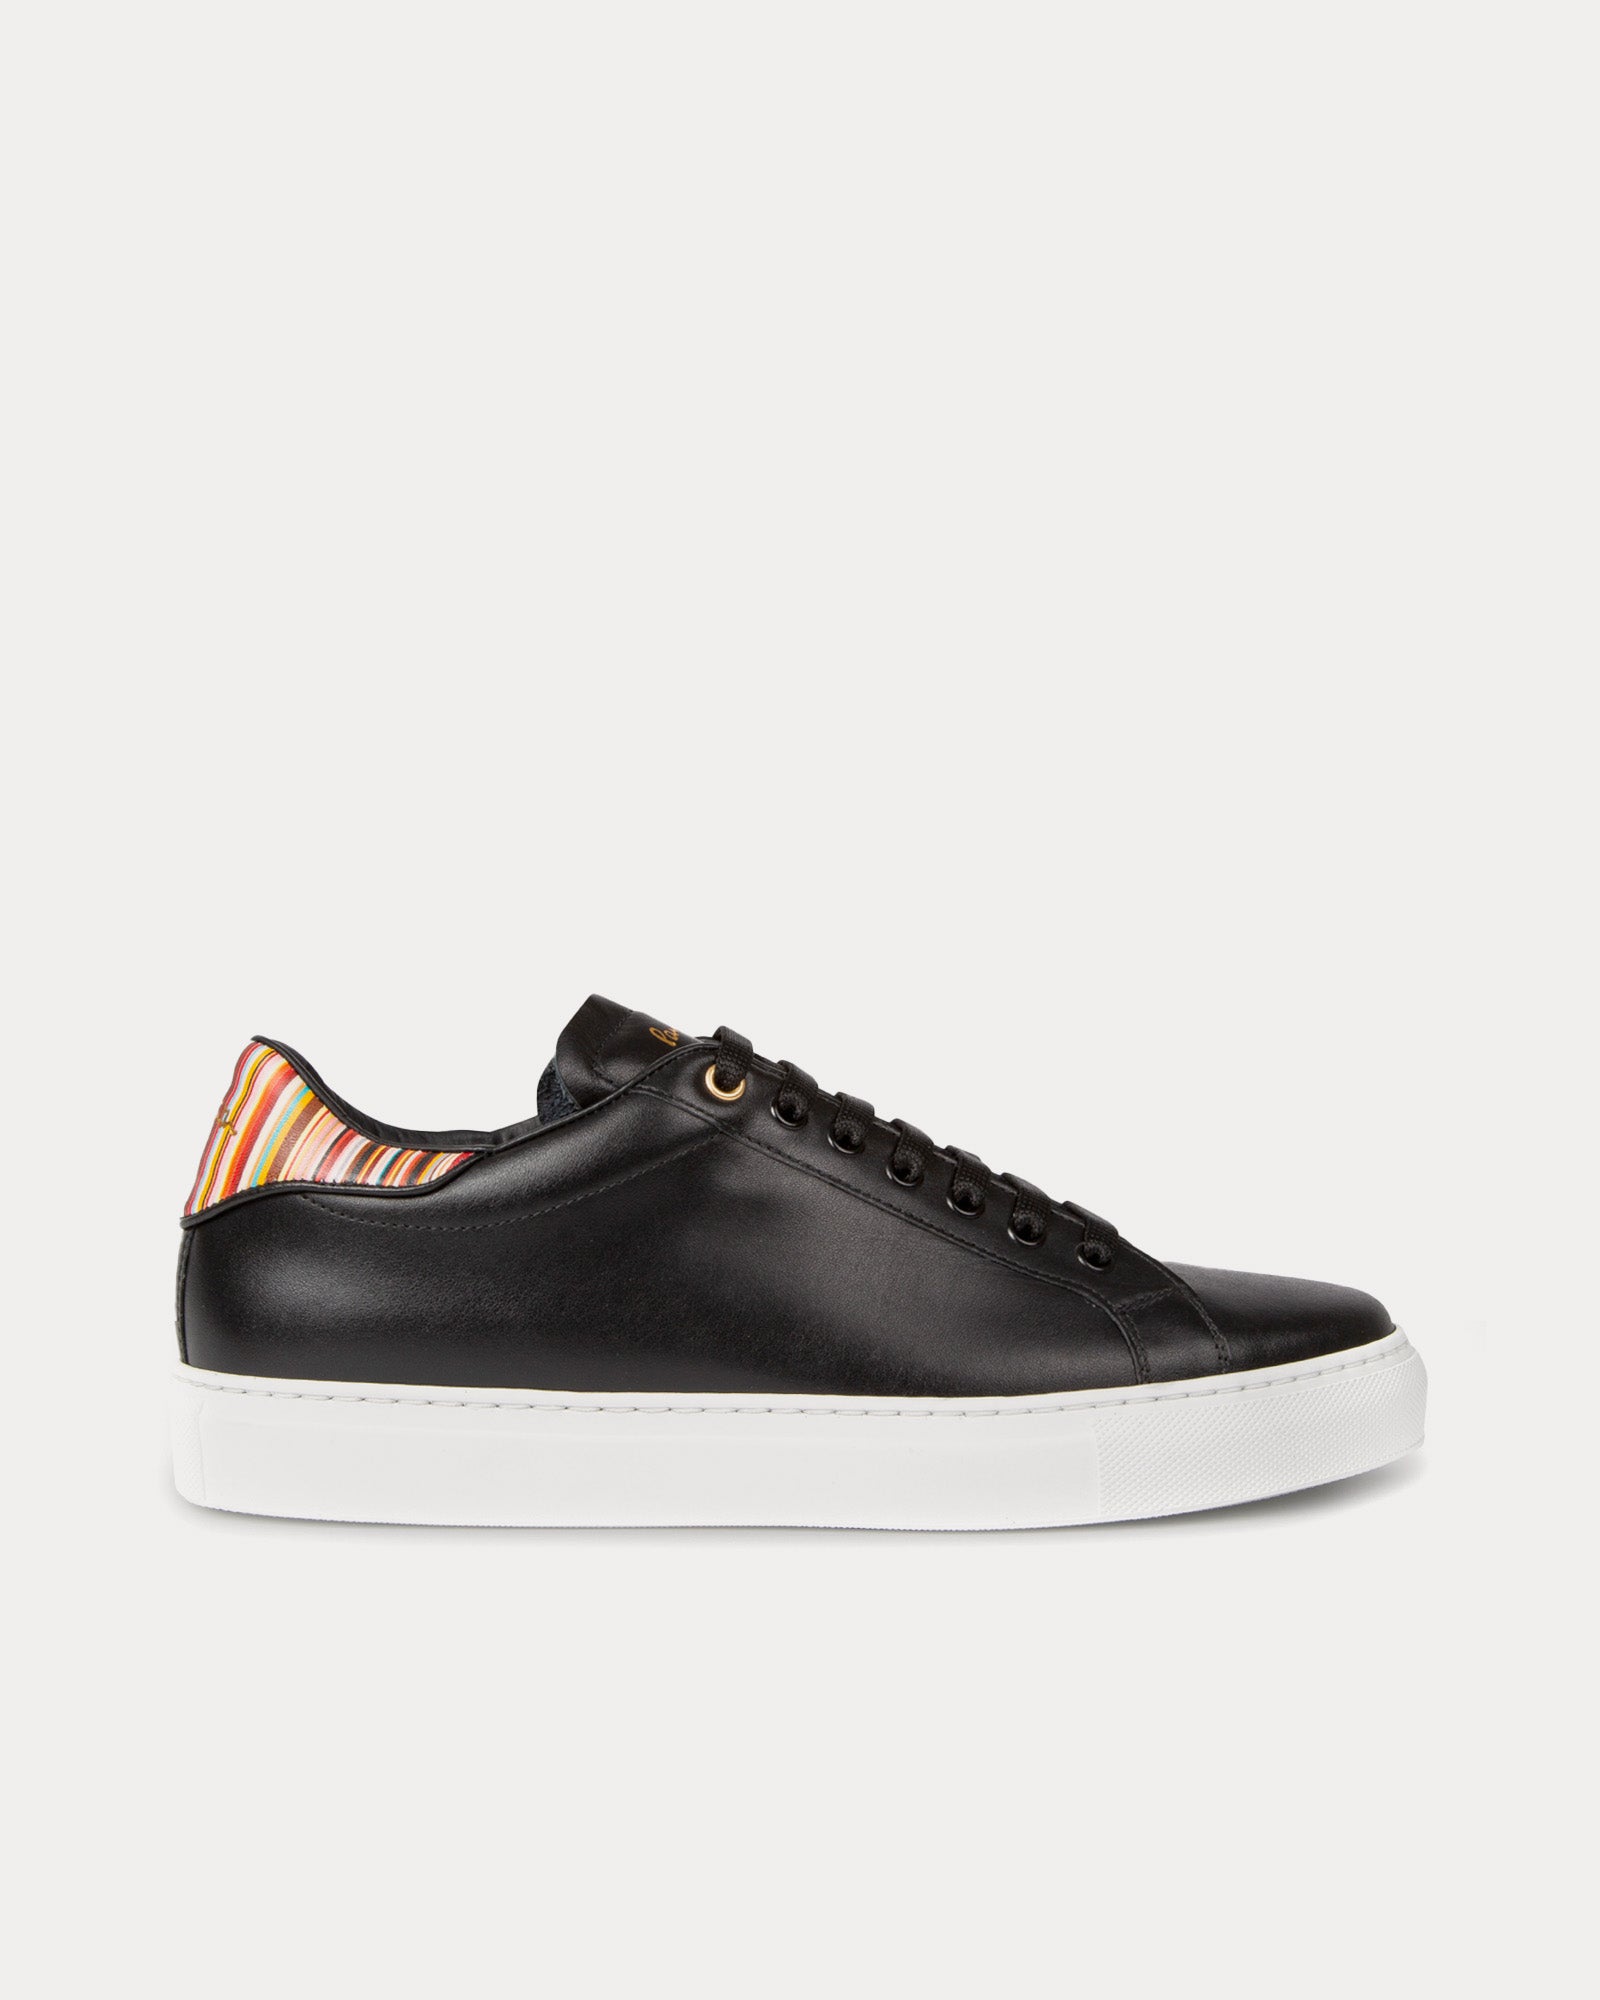 Paul Smith - Beck with Signature Stripe Leather Black / White Low Top Sneakers